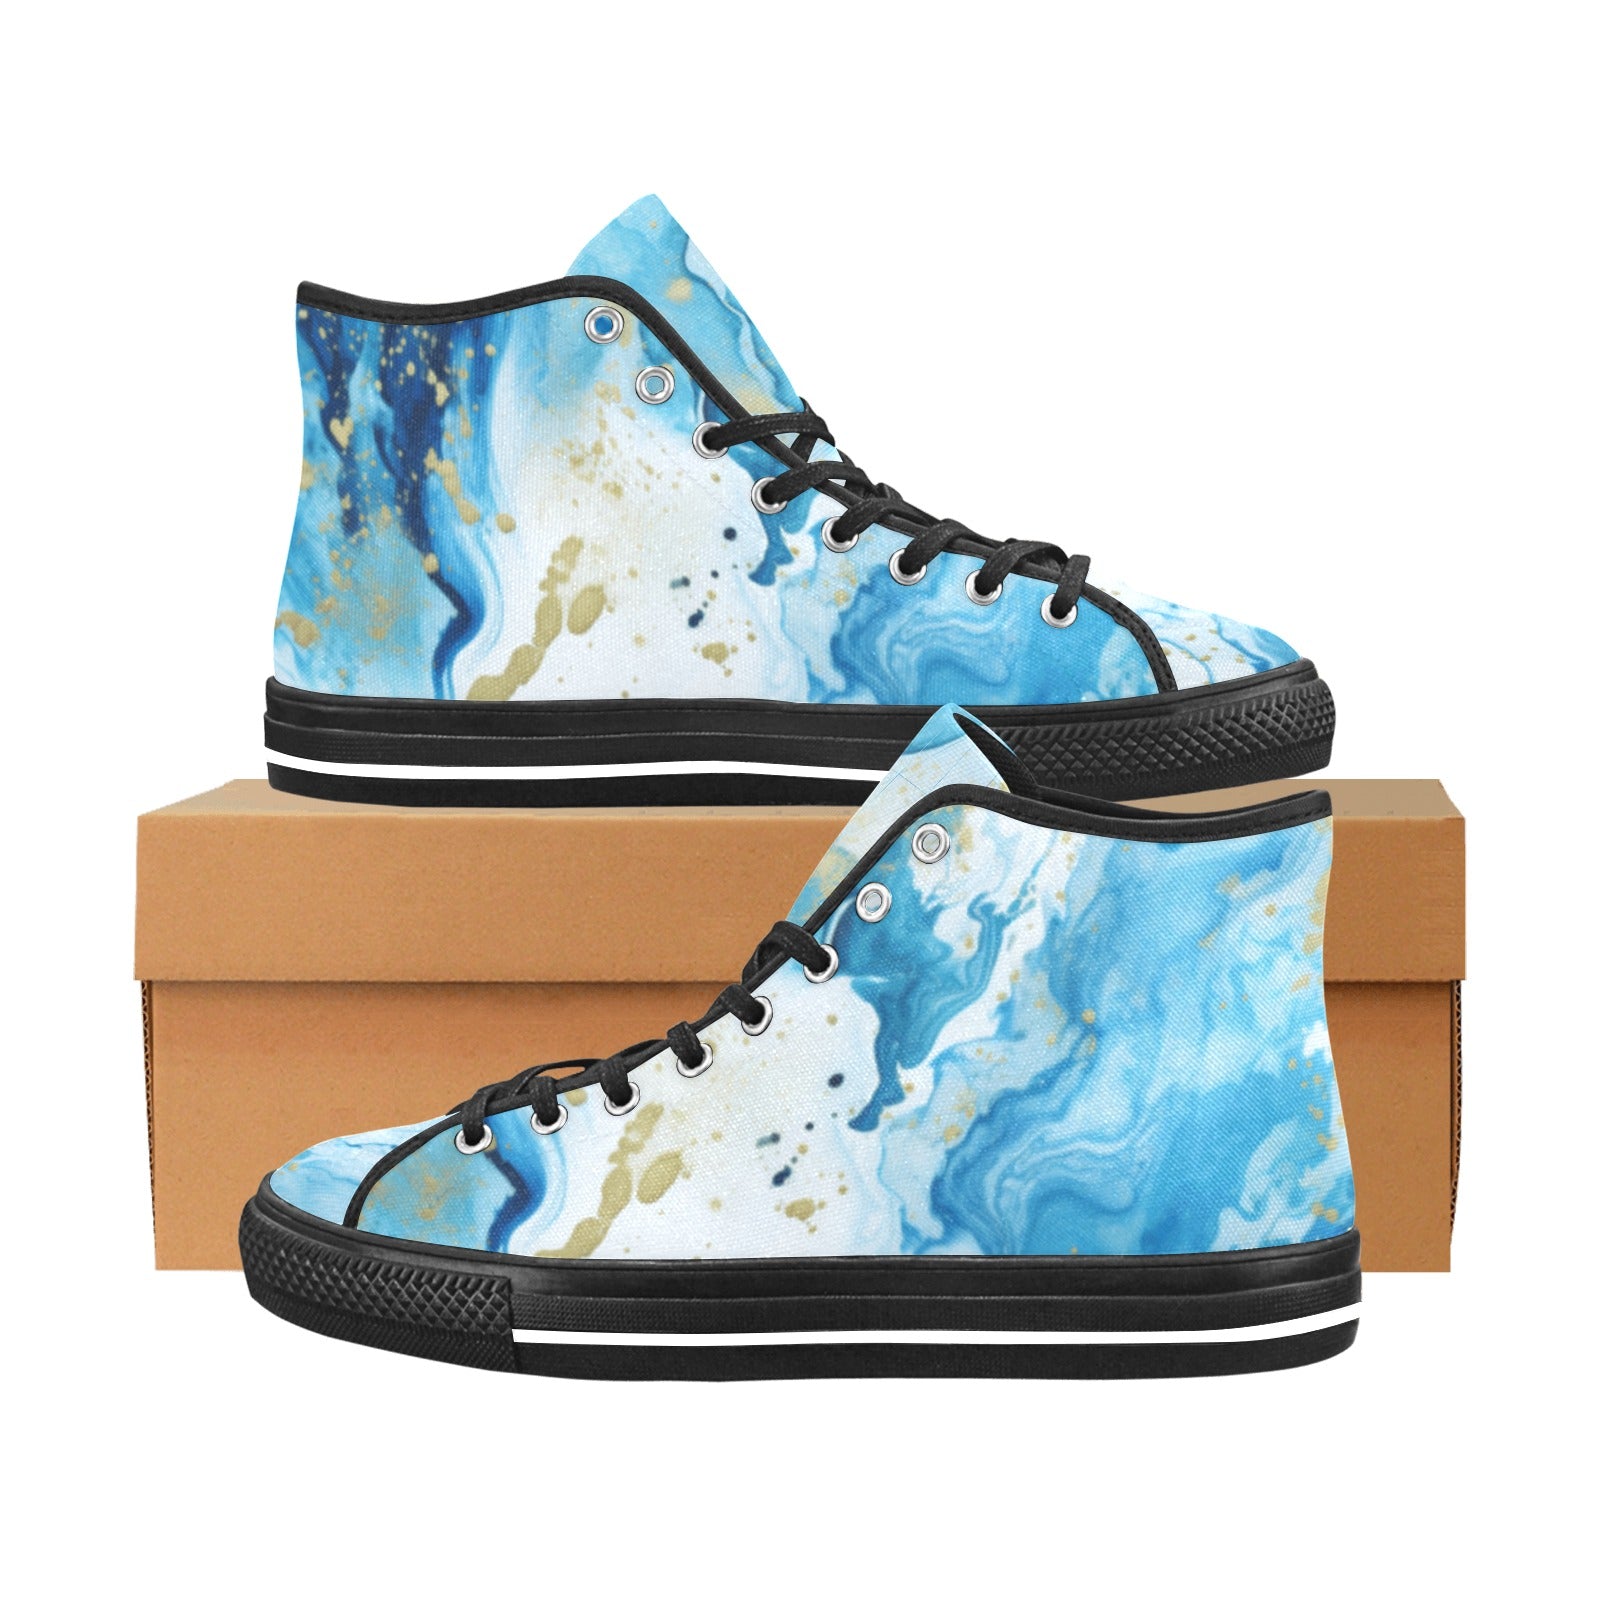 Blue & Gold Vancouver High Top Canvas Shoes for Women - Stylish & Personalized All-Over Print